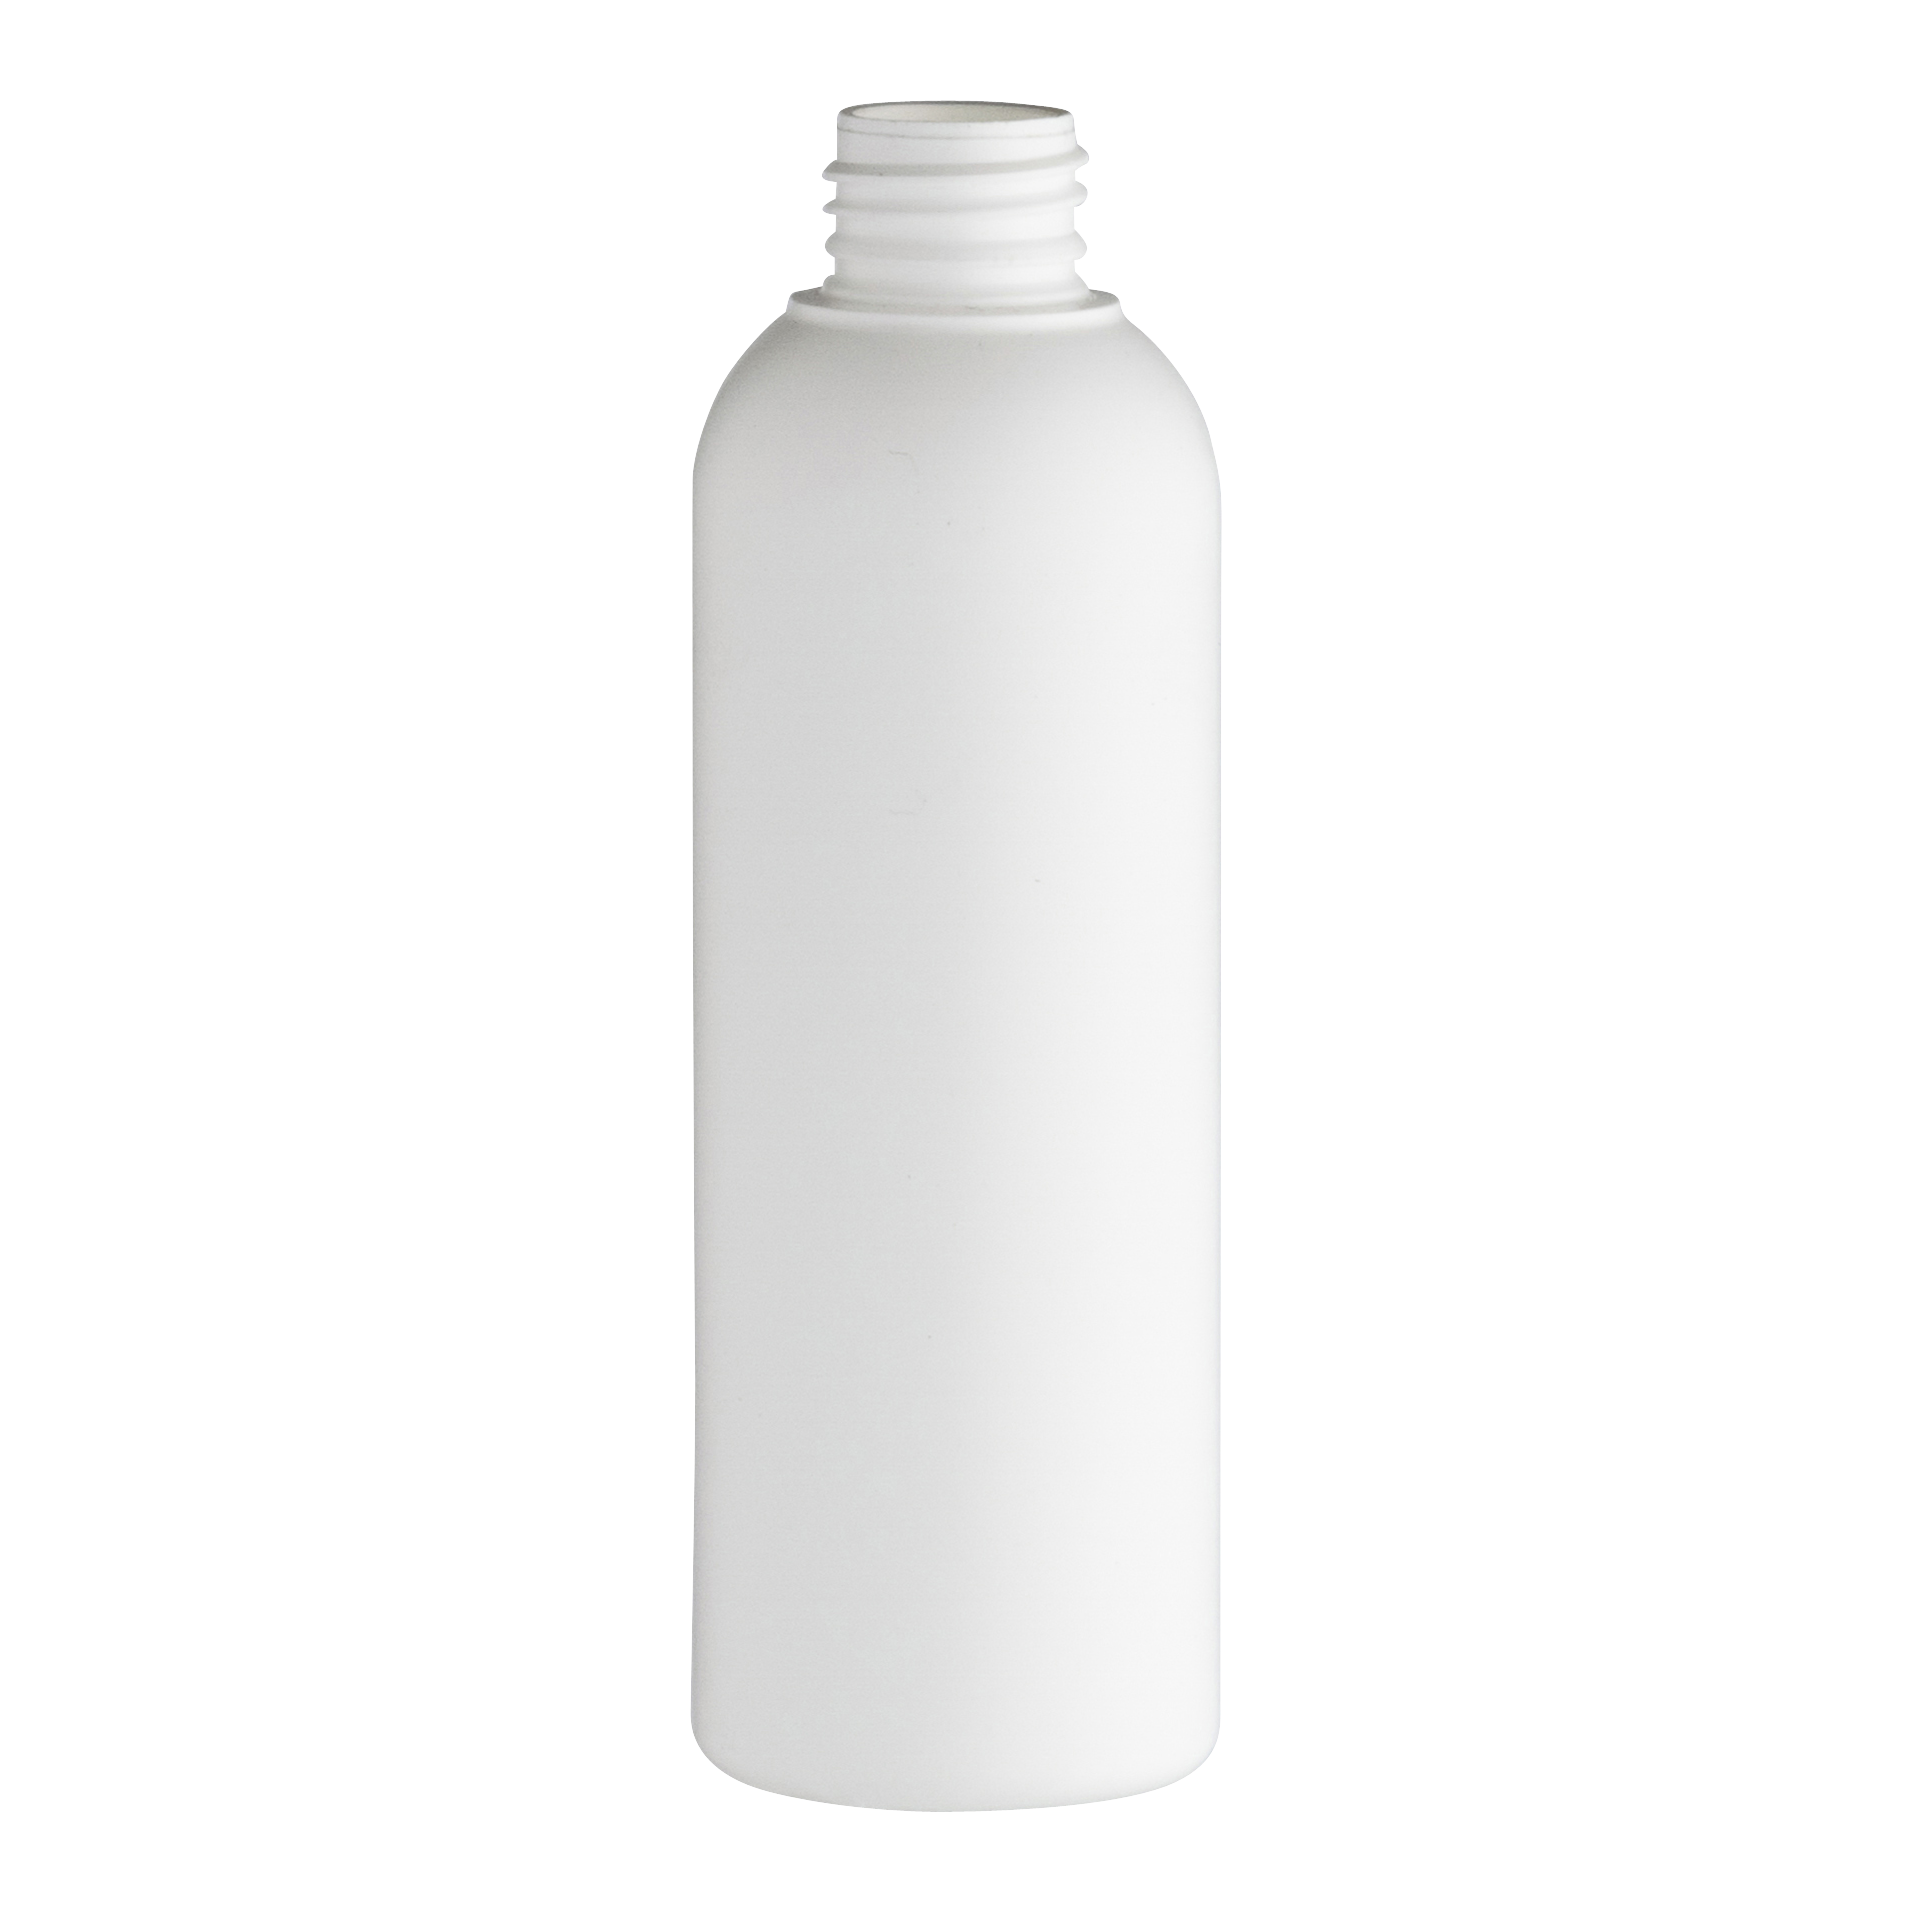 container in plastic douceur bottle-200ml-gcmi 24410 besafe-white vegetal circ pe